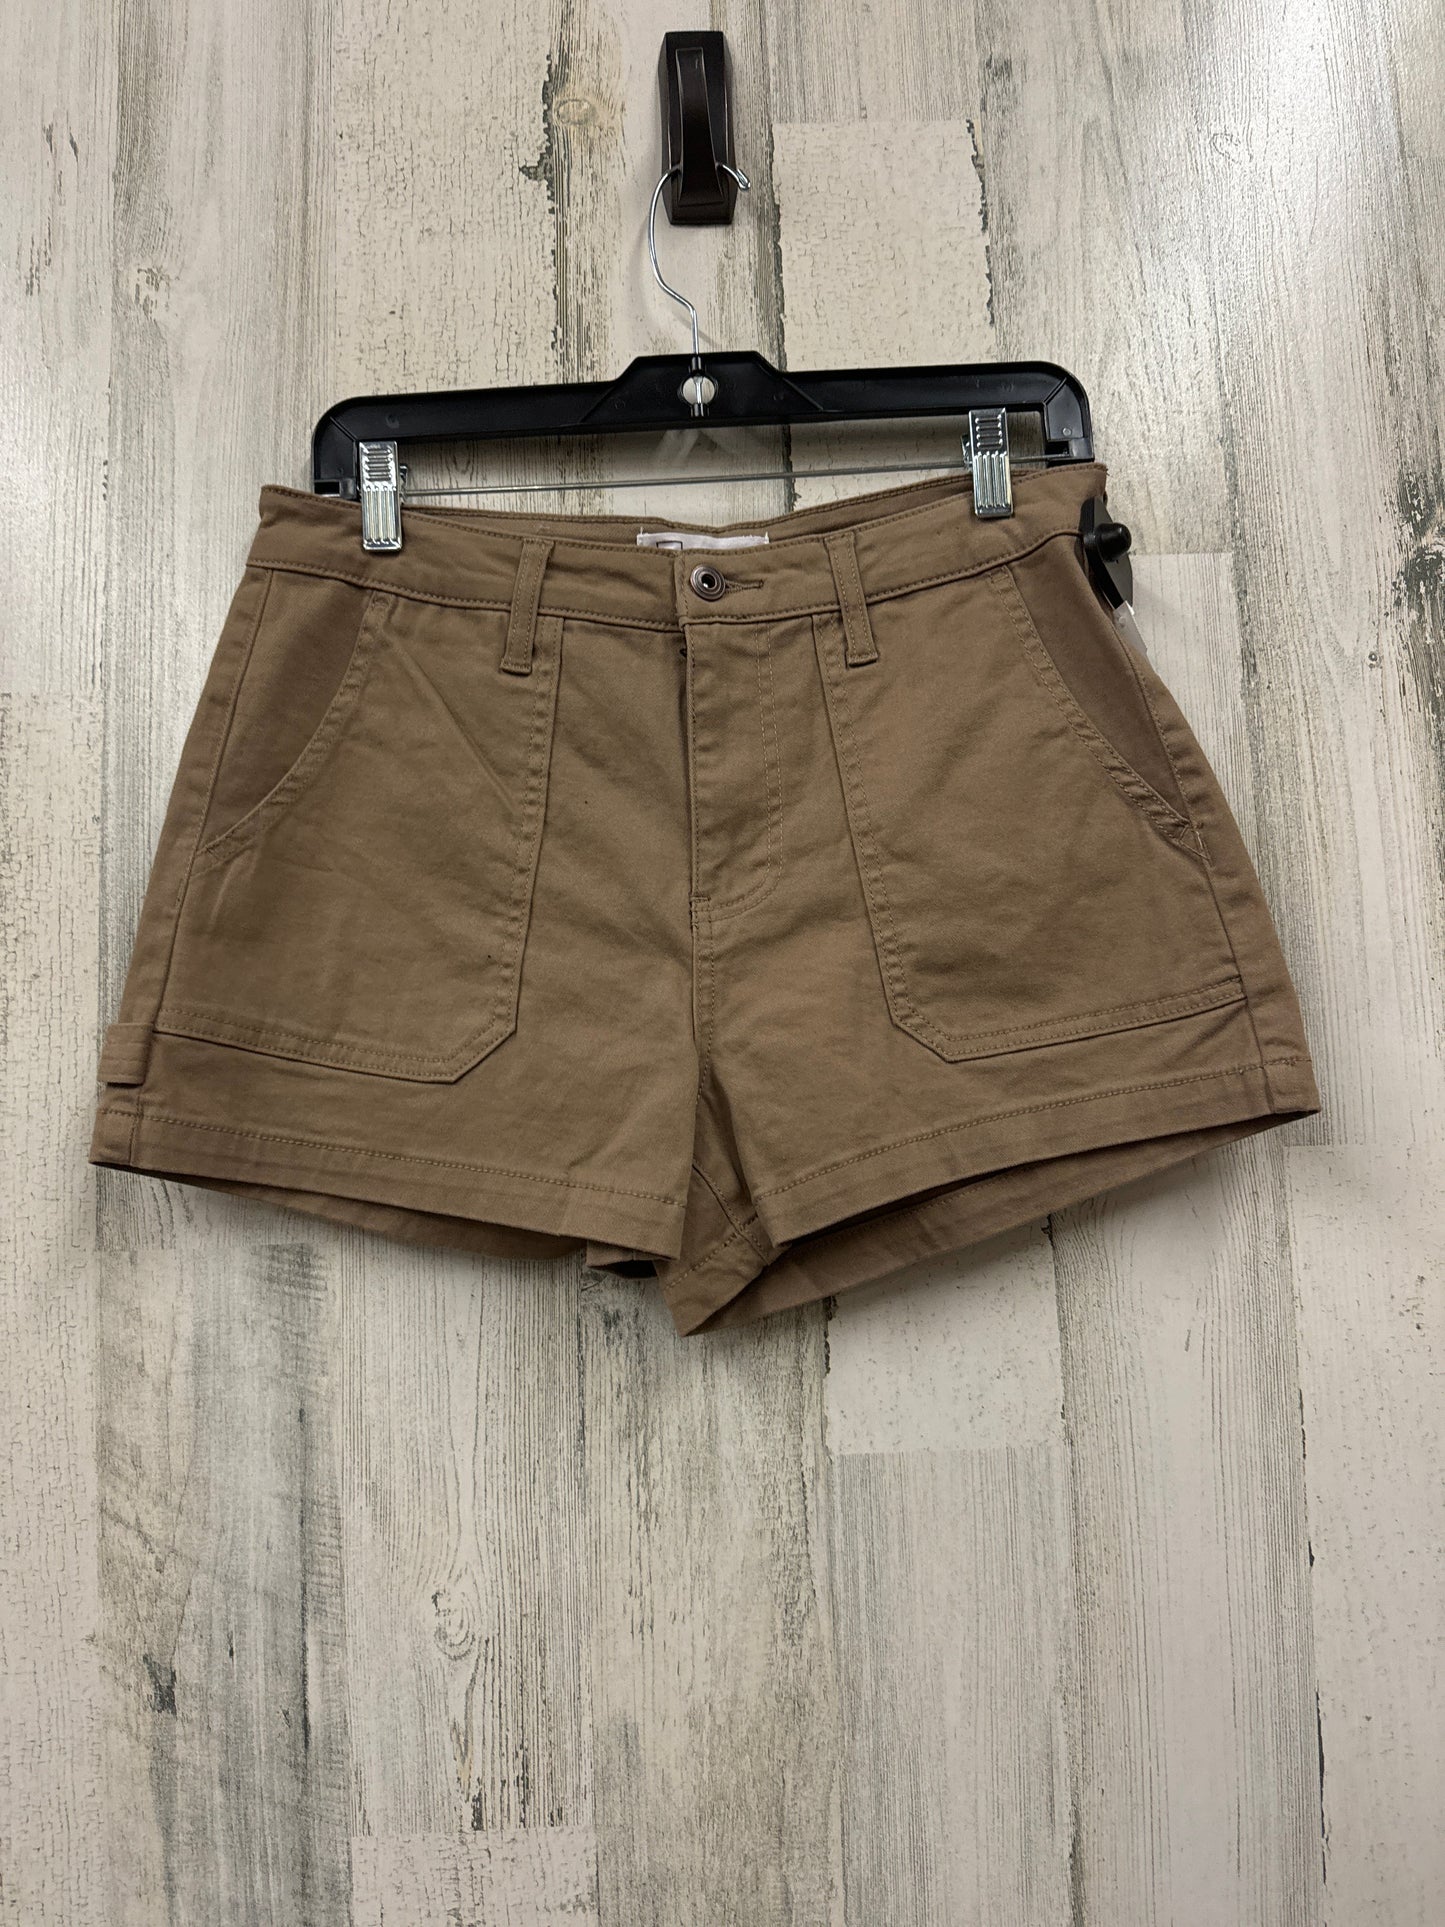 Brown Shorts Celebrity Pink, Size 8